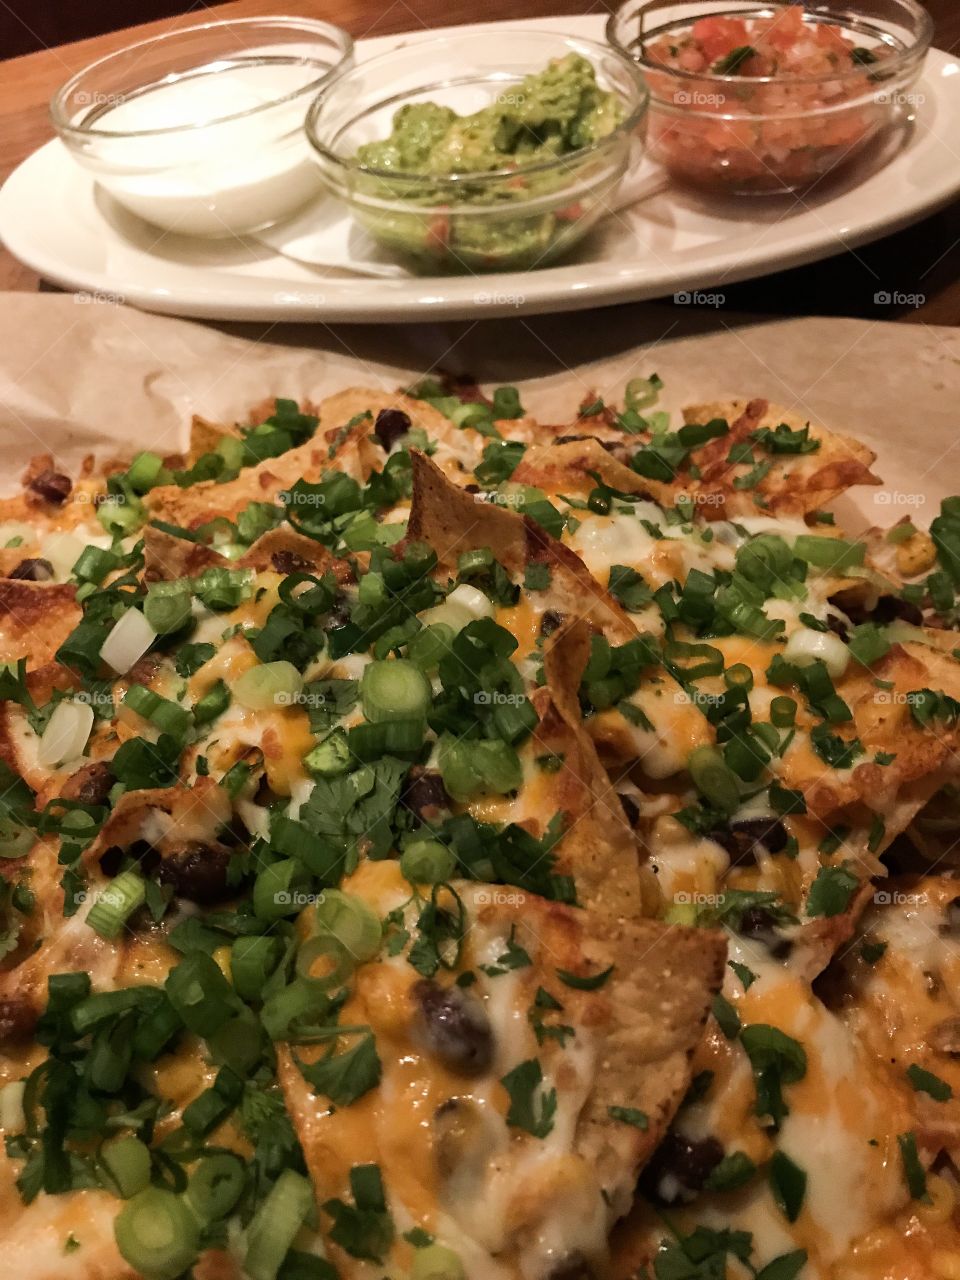 Extra cheesy Nachos, corn chips with two types of hot melted cheese, peppers, jalapeños, black olives & green onions. Served on the side with sour cream, guacamole & spicy salsa. Yummy! 🥵